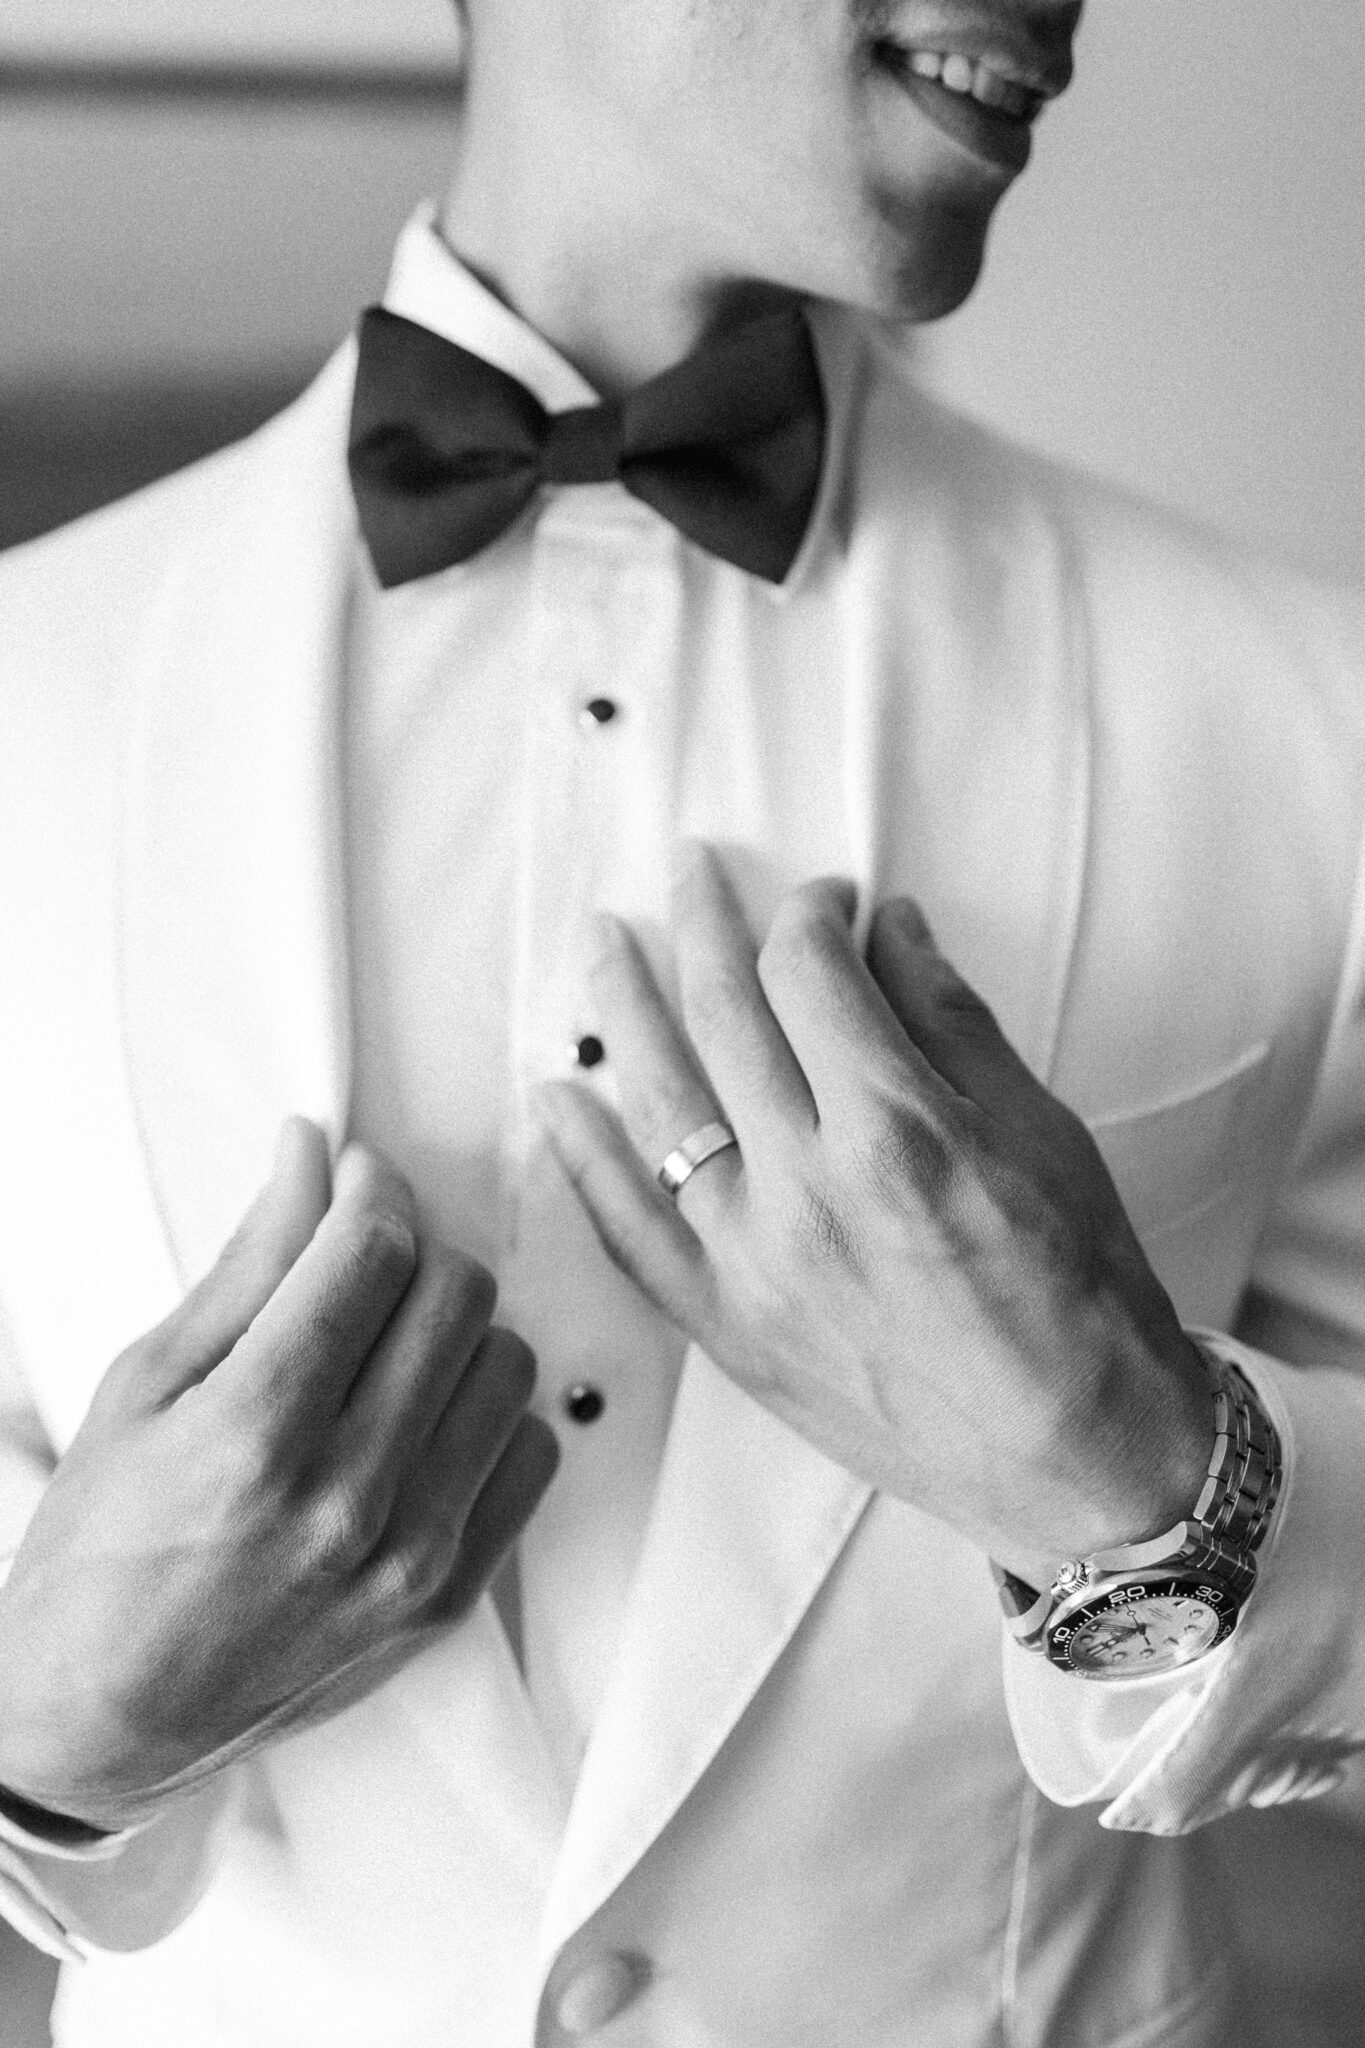 Groom getting ready on his wedding day at Sparrowlane Events. Elegant wedding inspiration. Classy white tux jacket and black pants by Atelier Suiting.